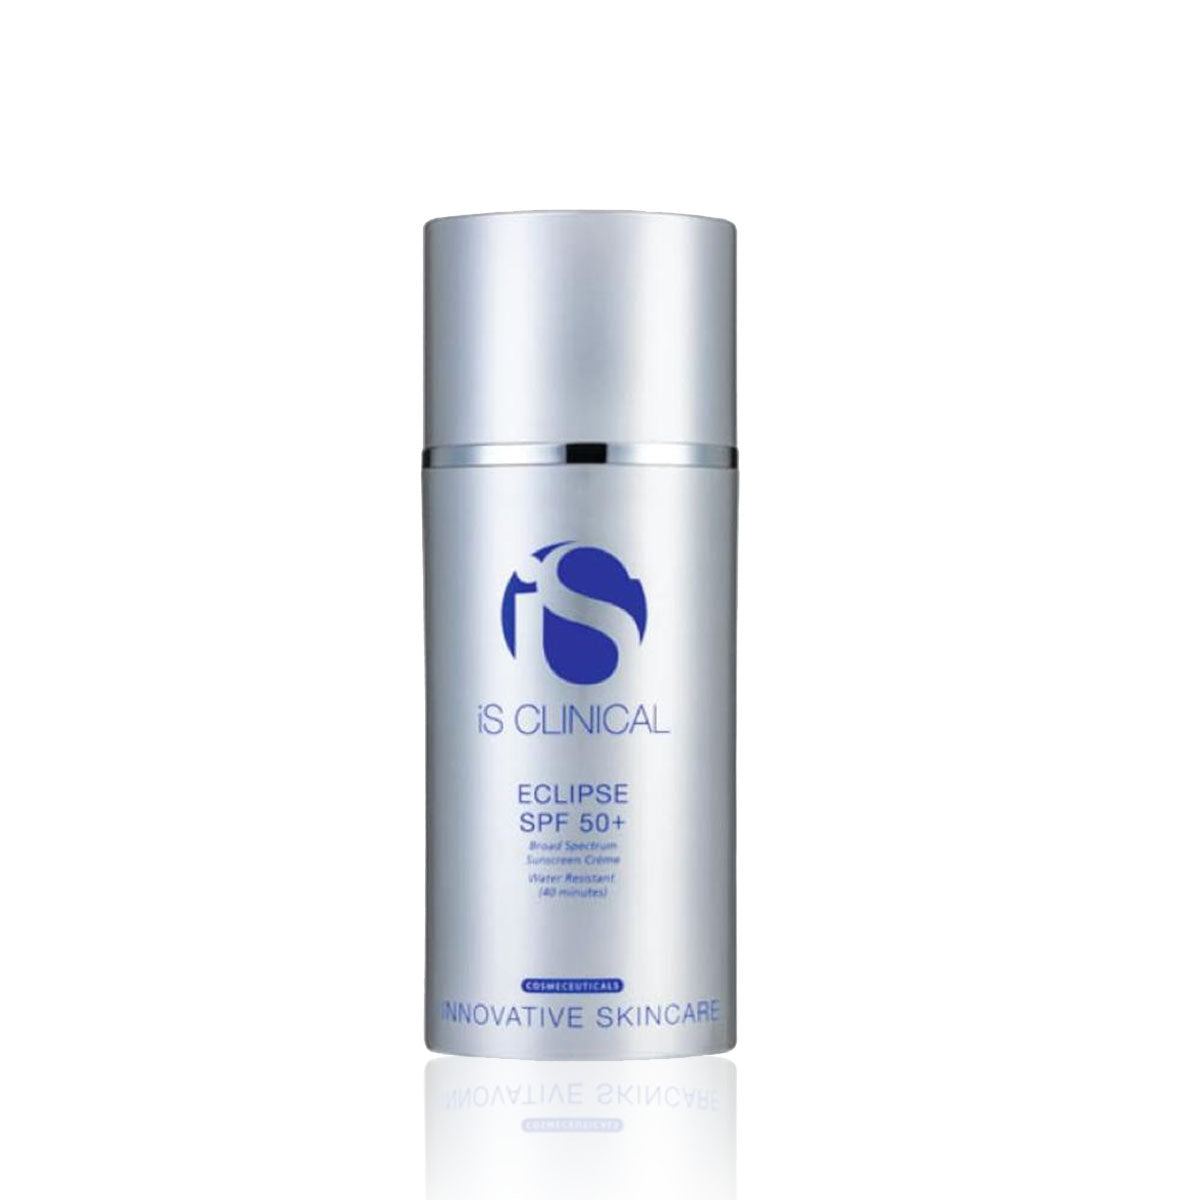 IS Clinical Light Insulating Sunscreen SPF50+ Original Color | Eclipse SPF50+ Non-Tinted 90g